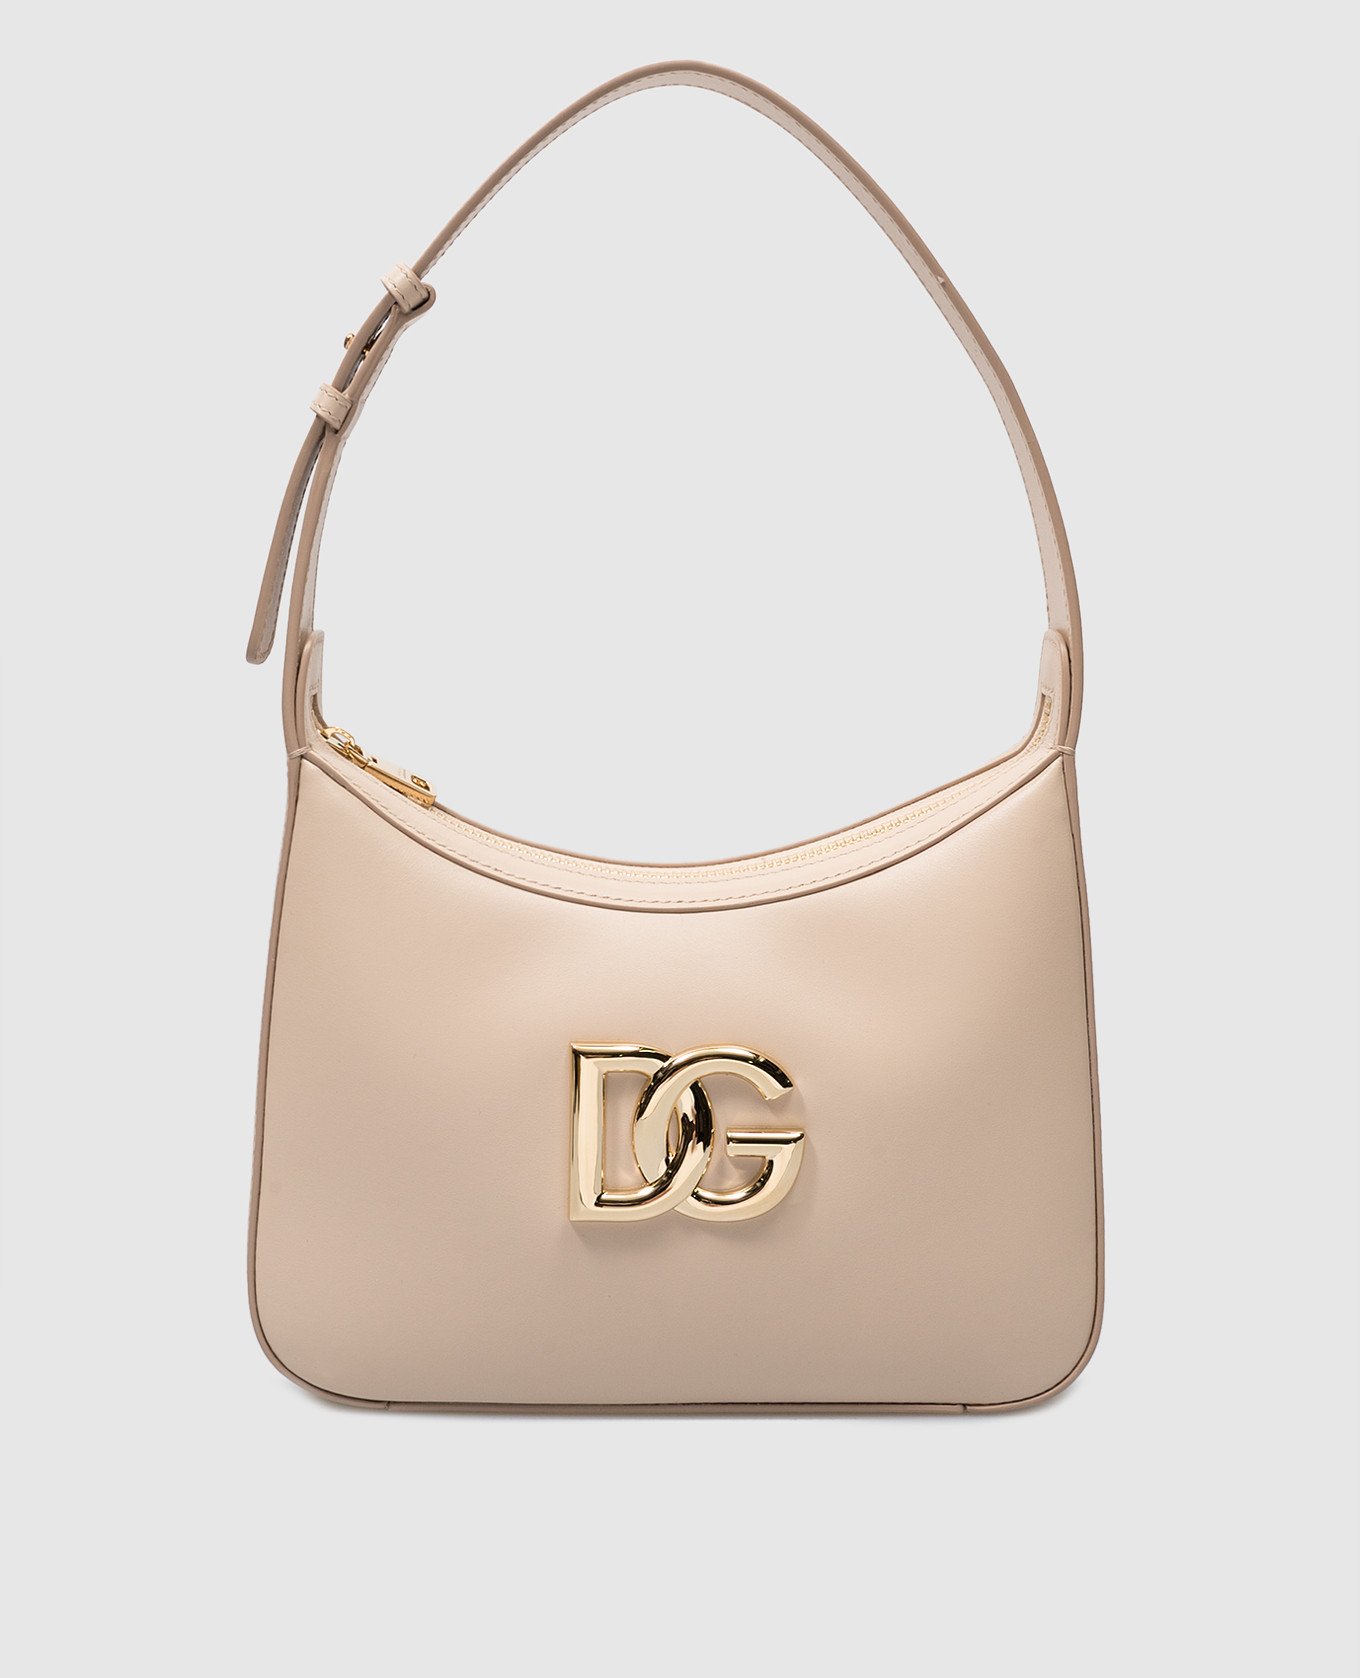 Beige leather bag with metal logo